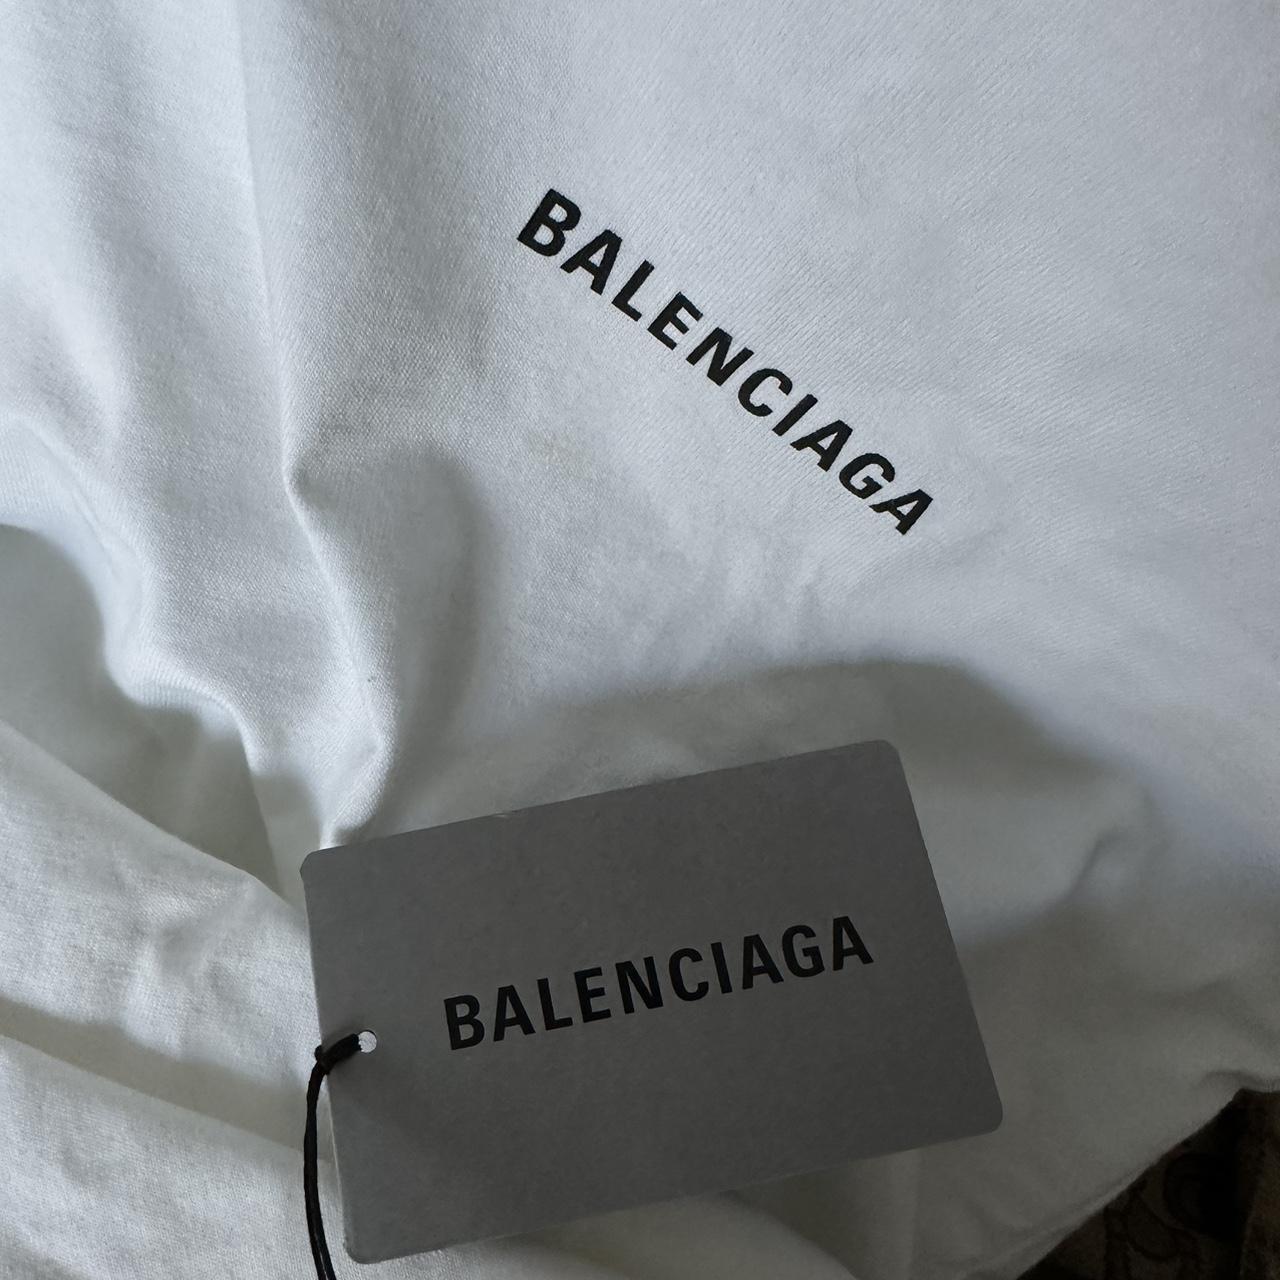 Balenciaga apologizes amid outcry over ad featuring sexualized children   Catholic News Agency